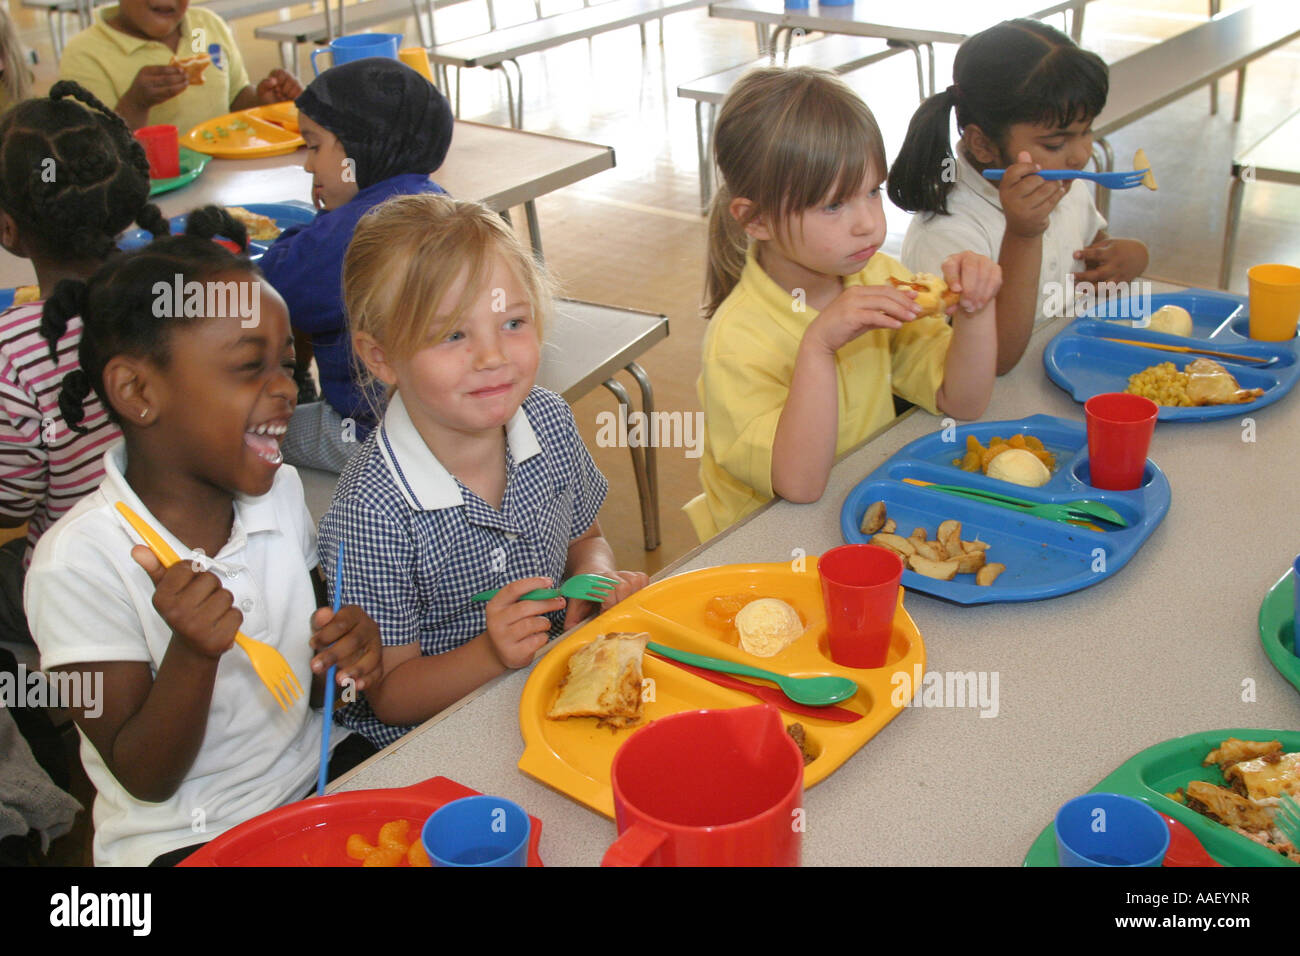 Children As Students Eat Lunch Together In The Canteen Of The School Stock  Photo, Picture and Royalty Free Image. Image 121973246.